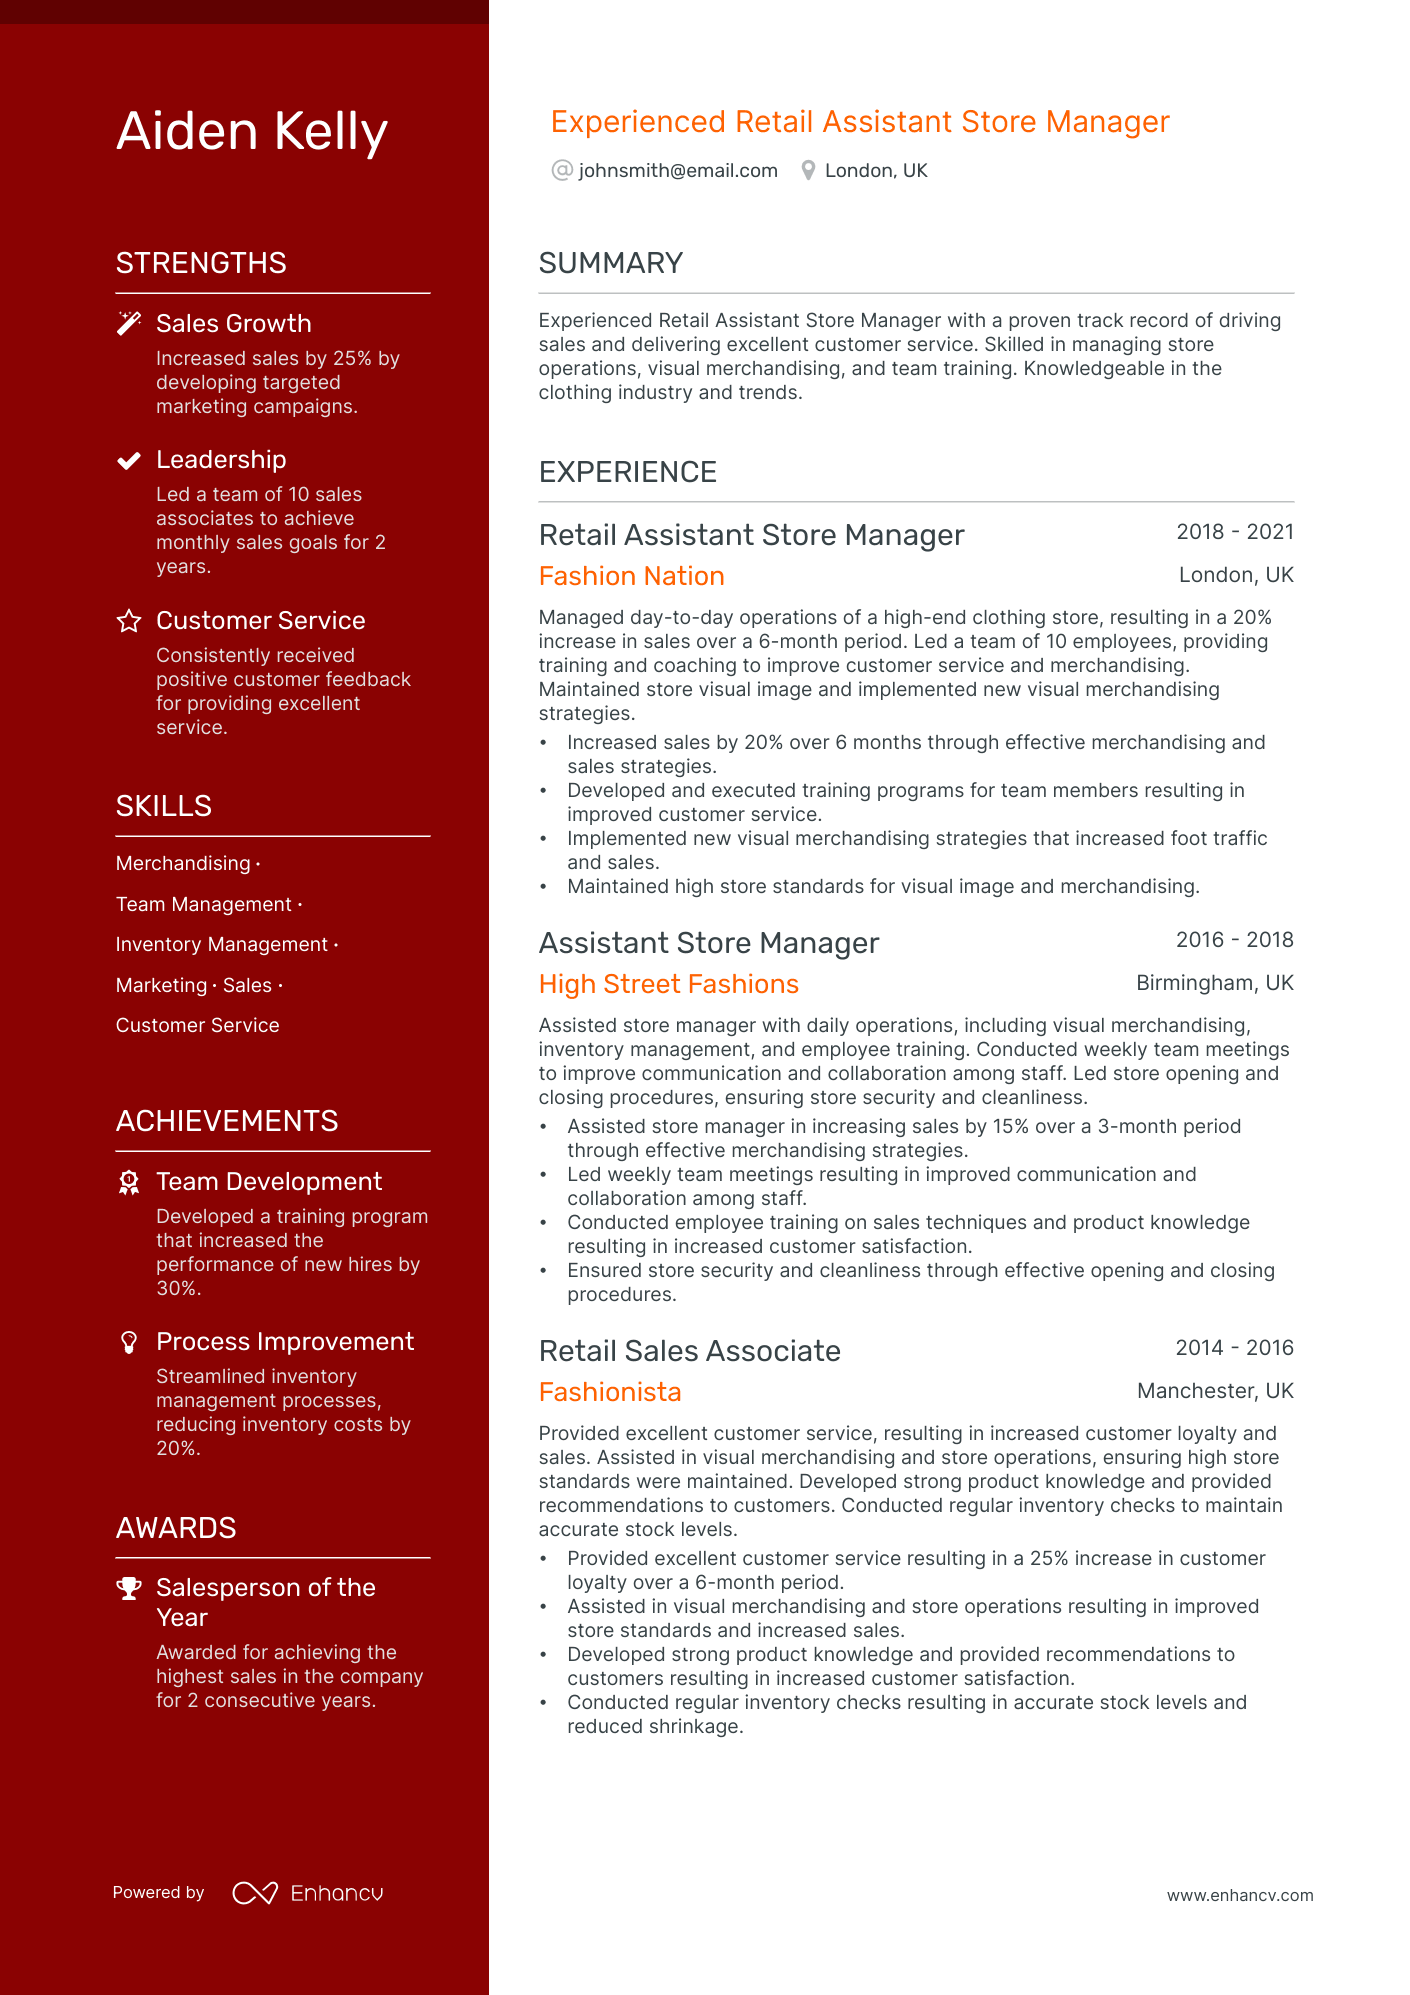 Retail Assistant Store Manager resume example